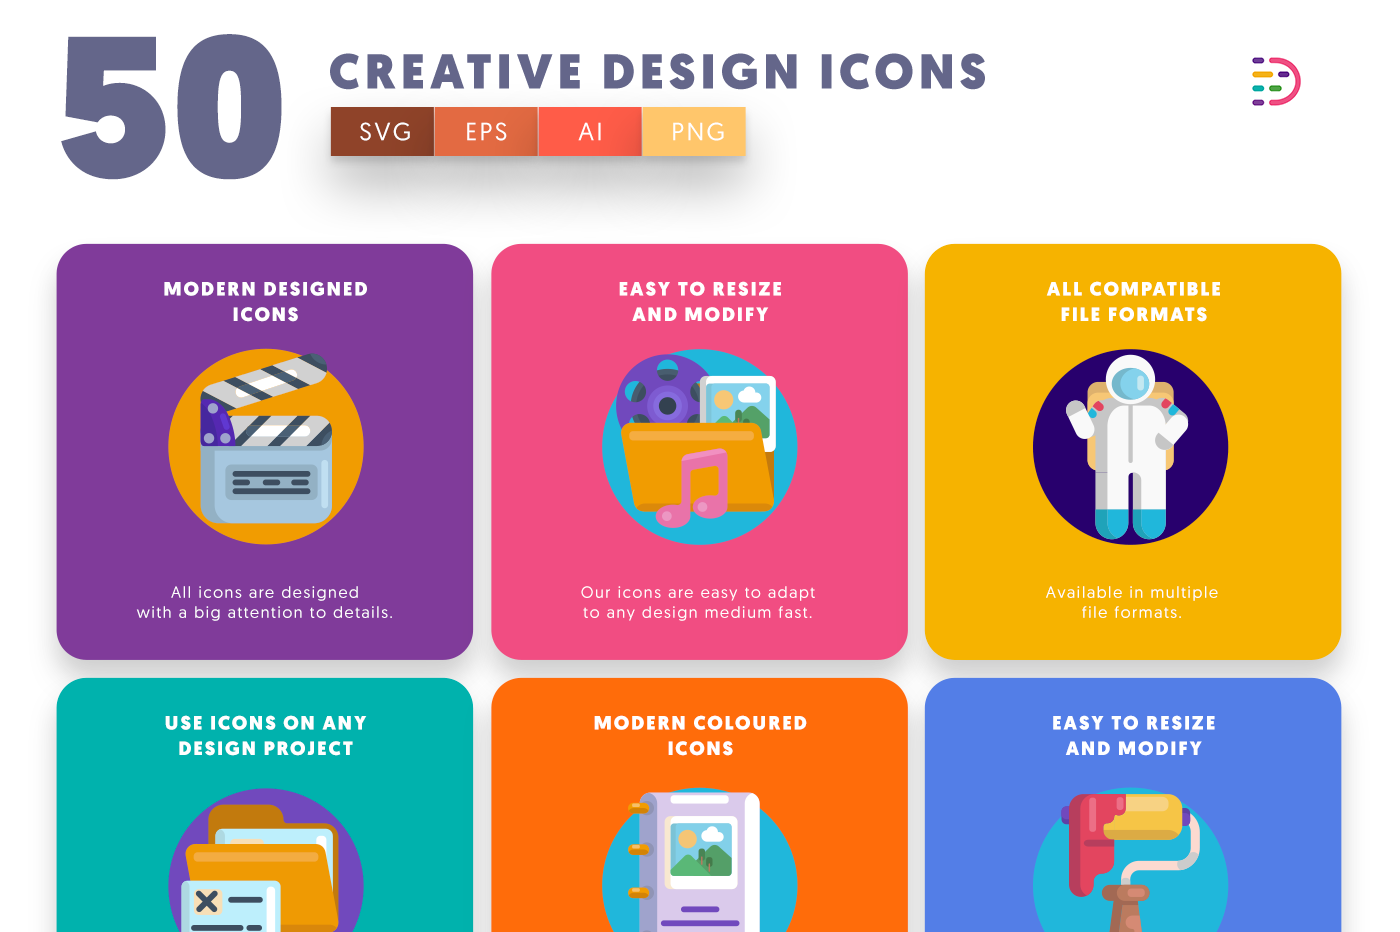 50 Creative Design Icons with colored backgrounds 